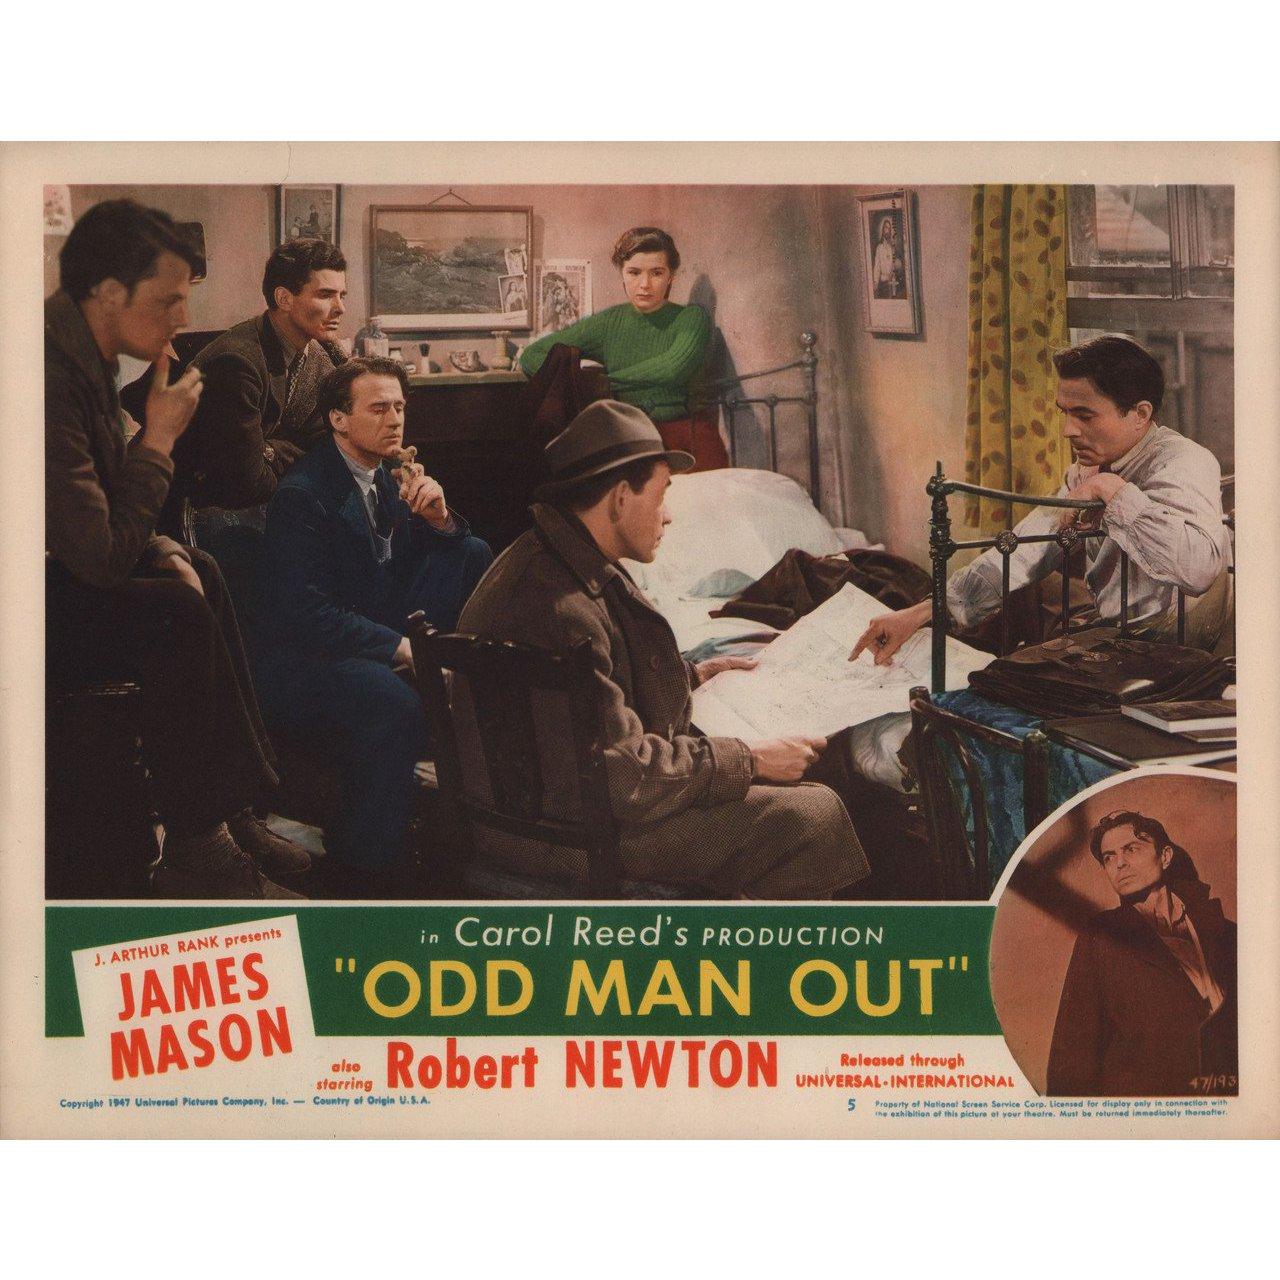 Original 1947 U.S. scene card for the film Odd Man Out directed by Carol Reed with James Mason / Robert Newton / Cyril Cusack / F.J. McCormick. Very Good condition. Please note: the size is stated in inches and the actual size can vary by an inch or